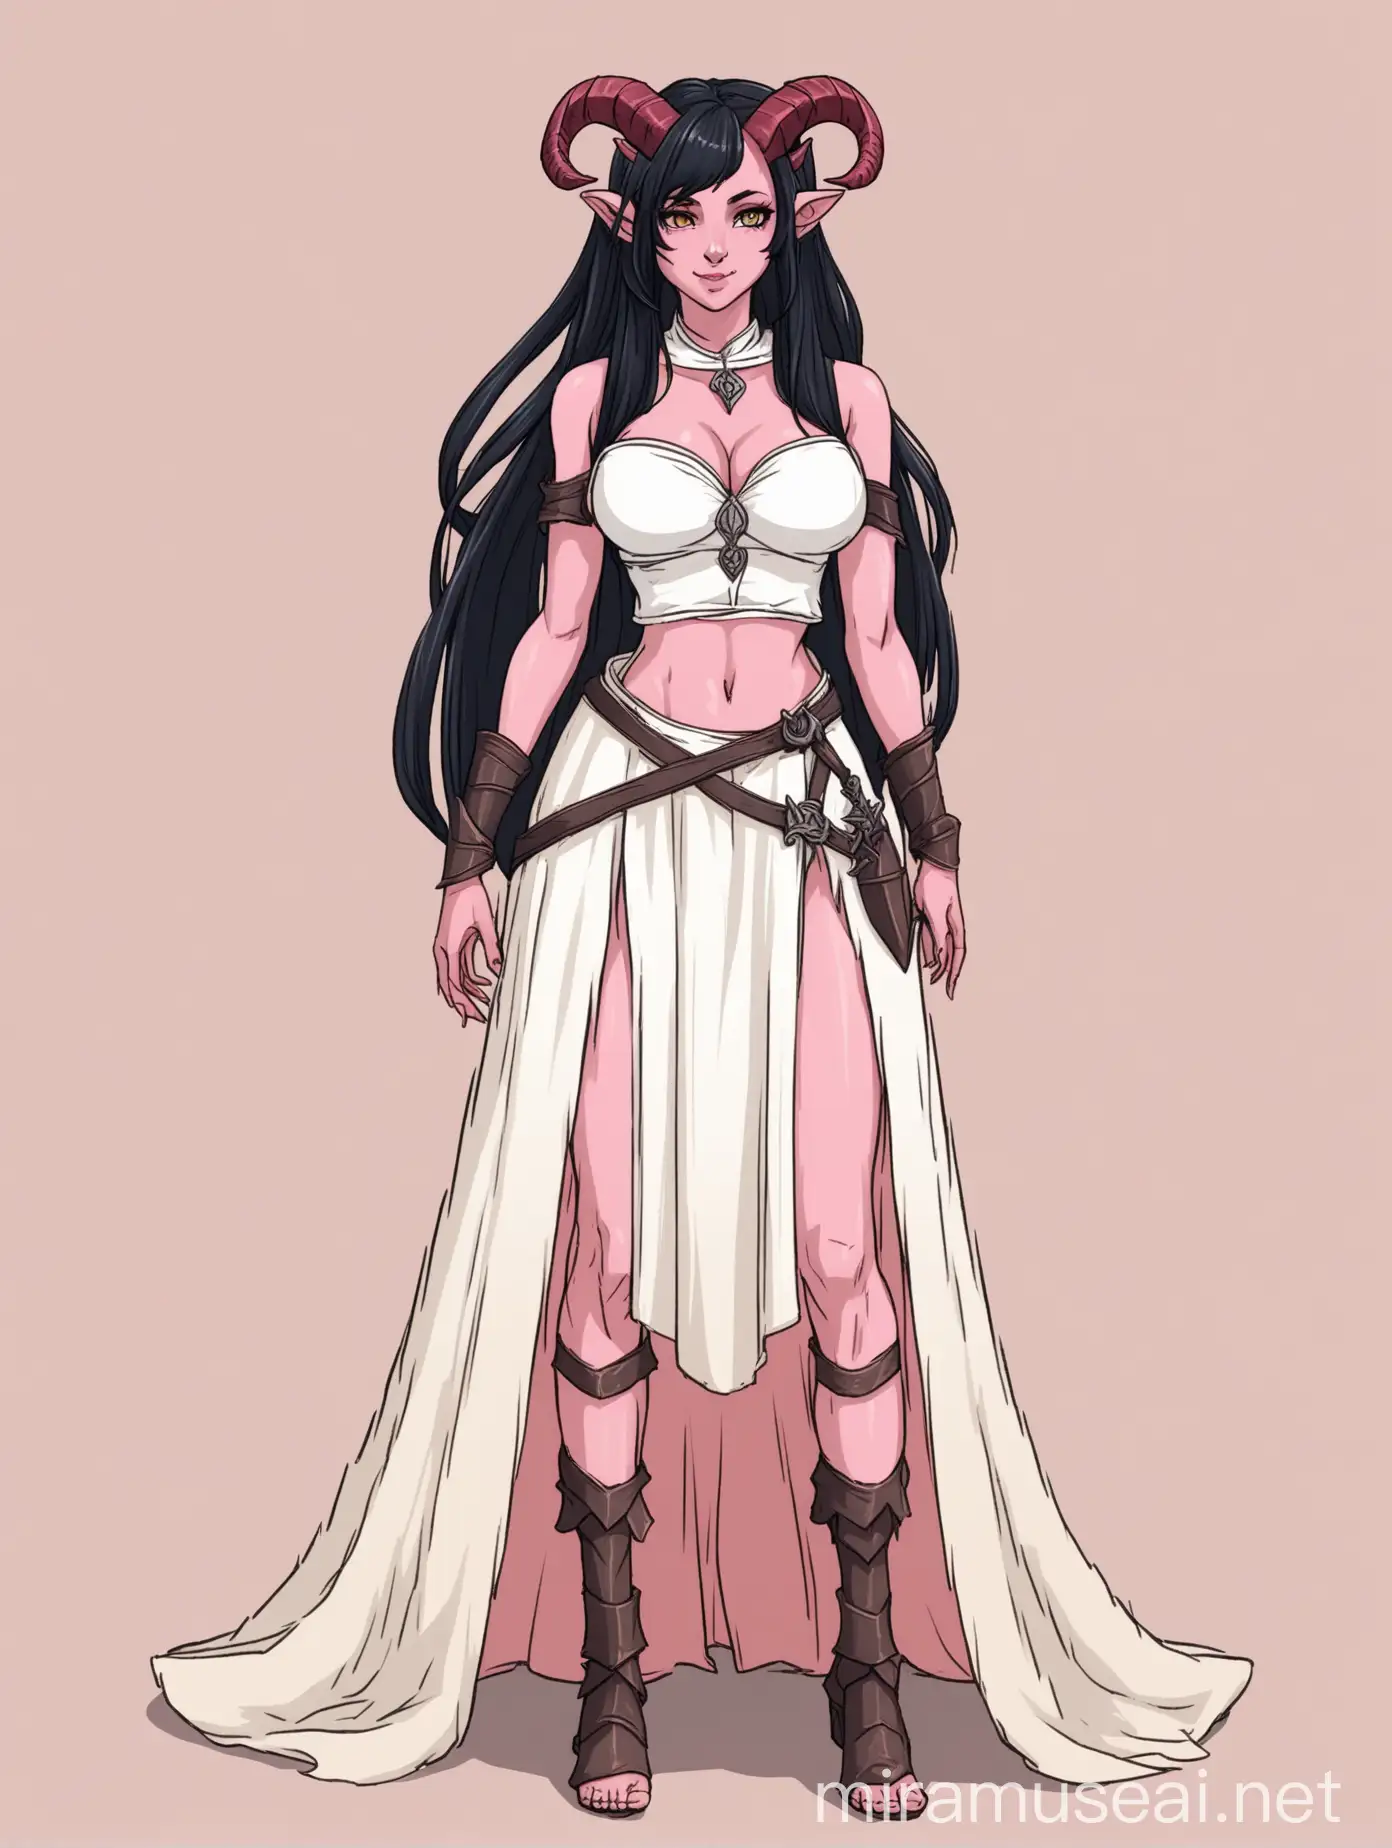 Female tiefling, adult, pastel pink skin colour, black hair, long hair, straight horns, pastel coloured horns, loose crop top, white top, revealing skirt, white skirt, medieval clothing style, full body view, decent breast size, cleavage shown